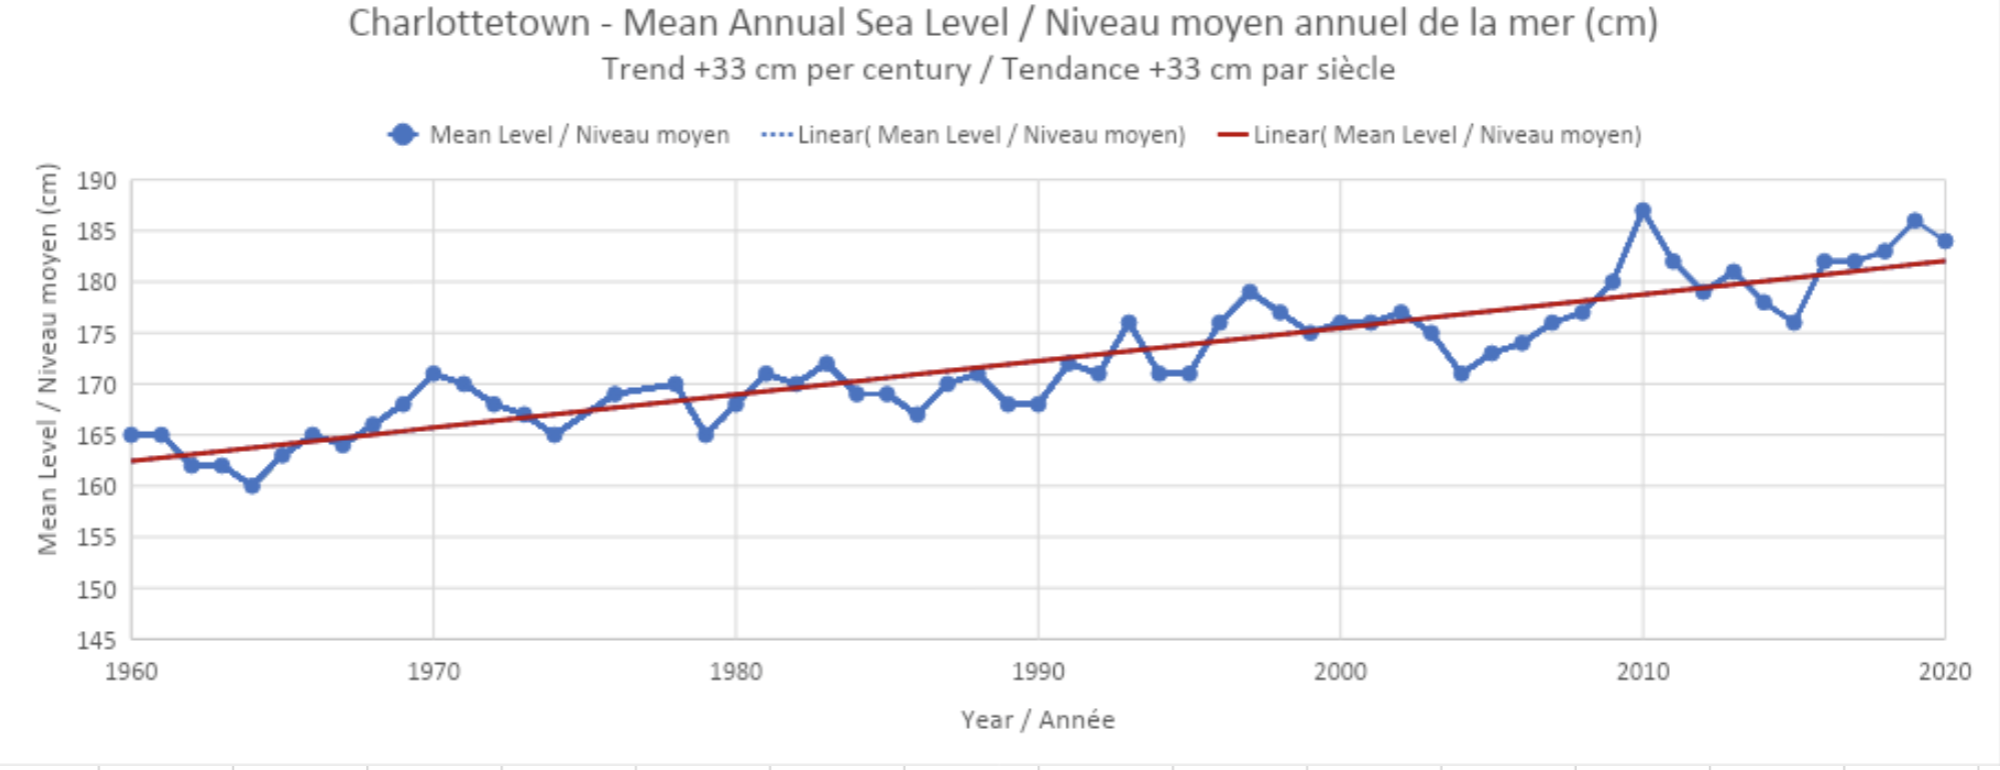 A graph titled "Charlottetown PEI - Mean Annual Sea Level, Trend +33 cm per century". The graph shows the years 1961-2021 and has an upward trend.